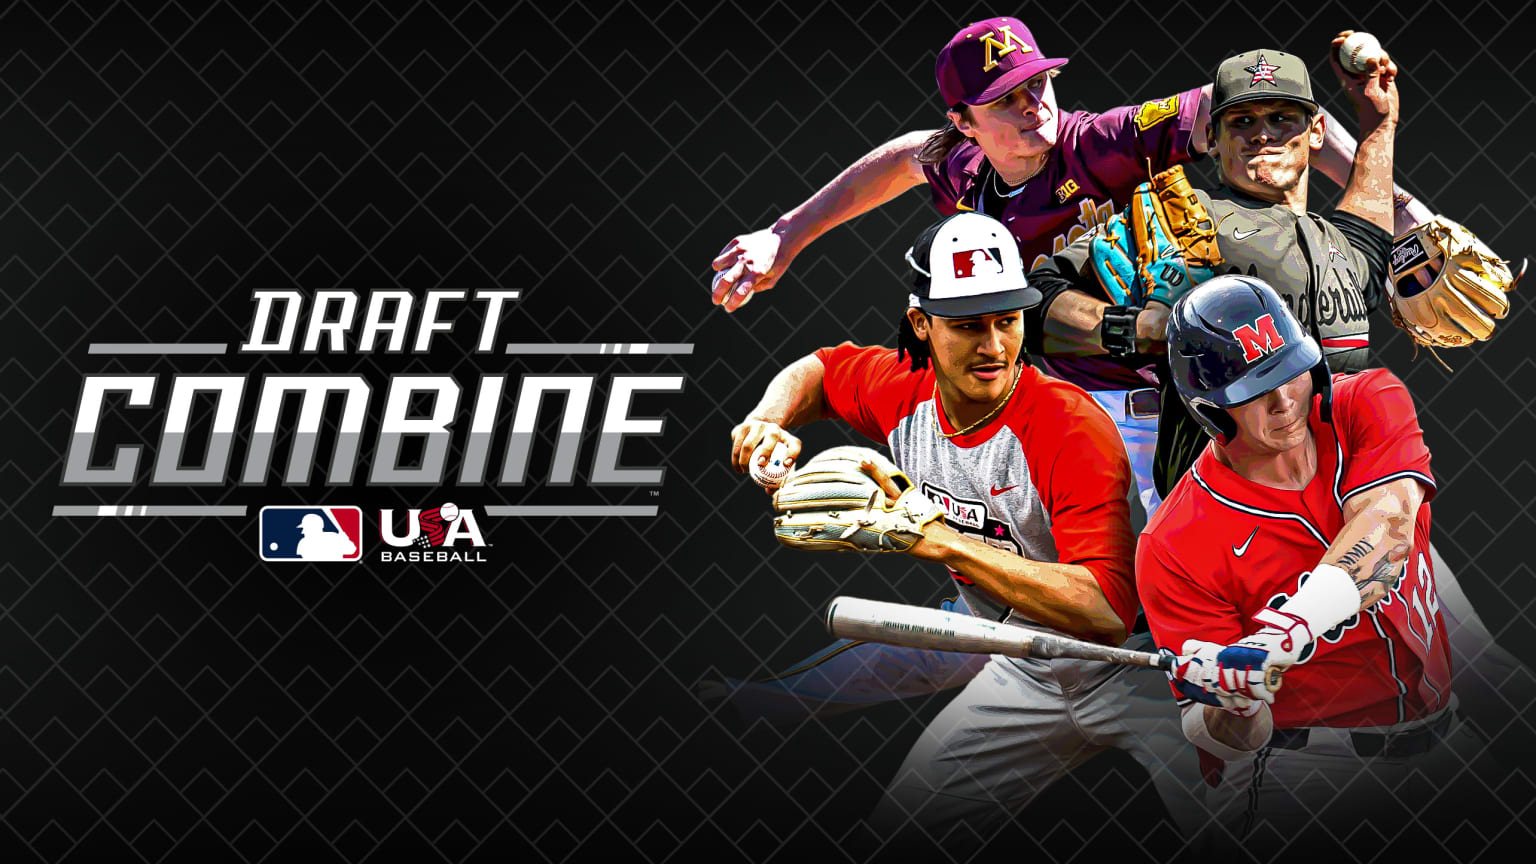 Four players are pictured next to a logo for the MLB Draft Combine